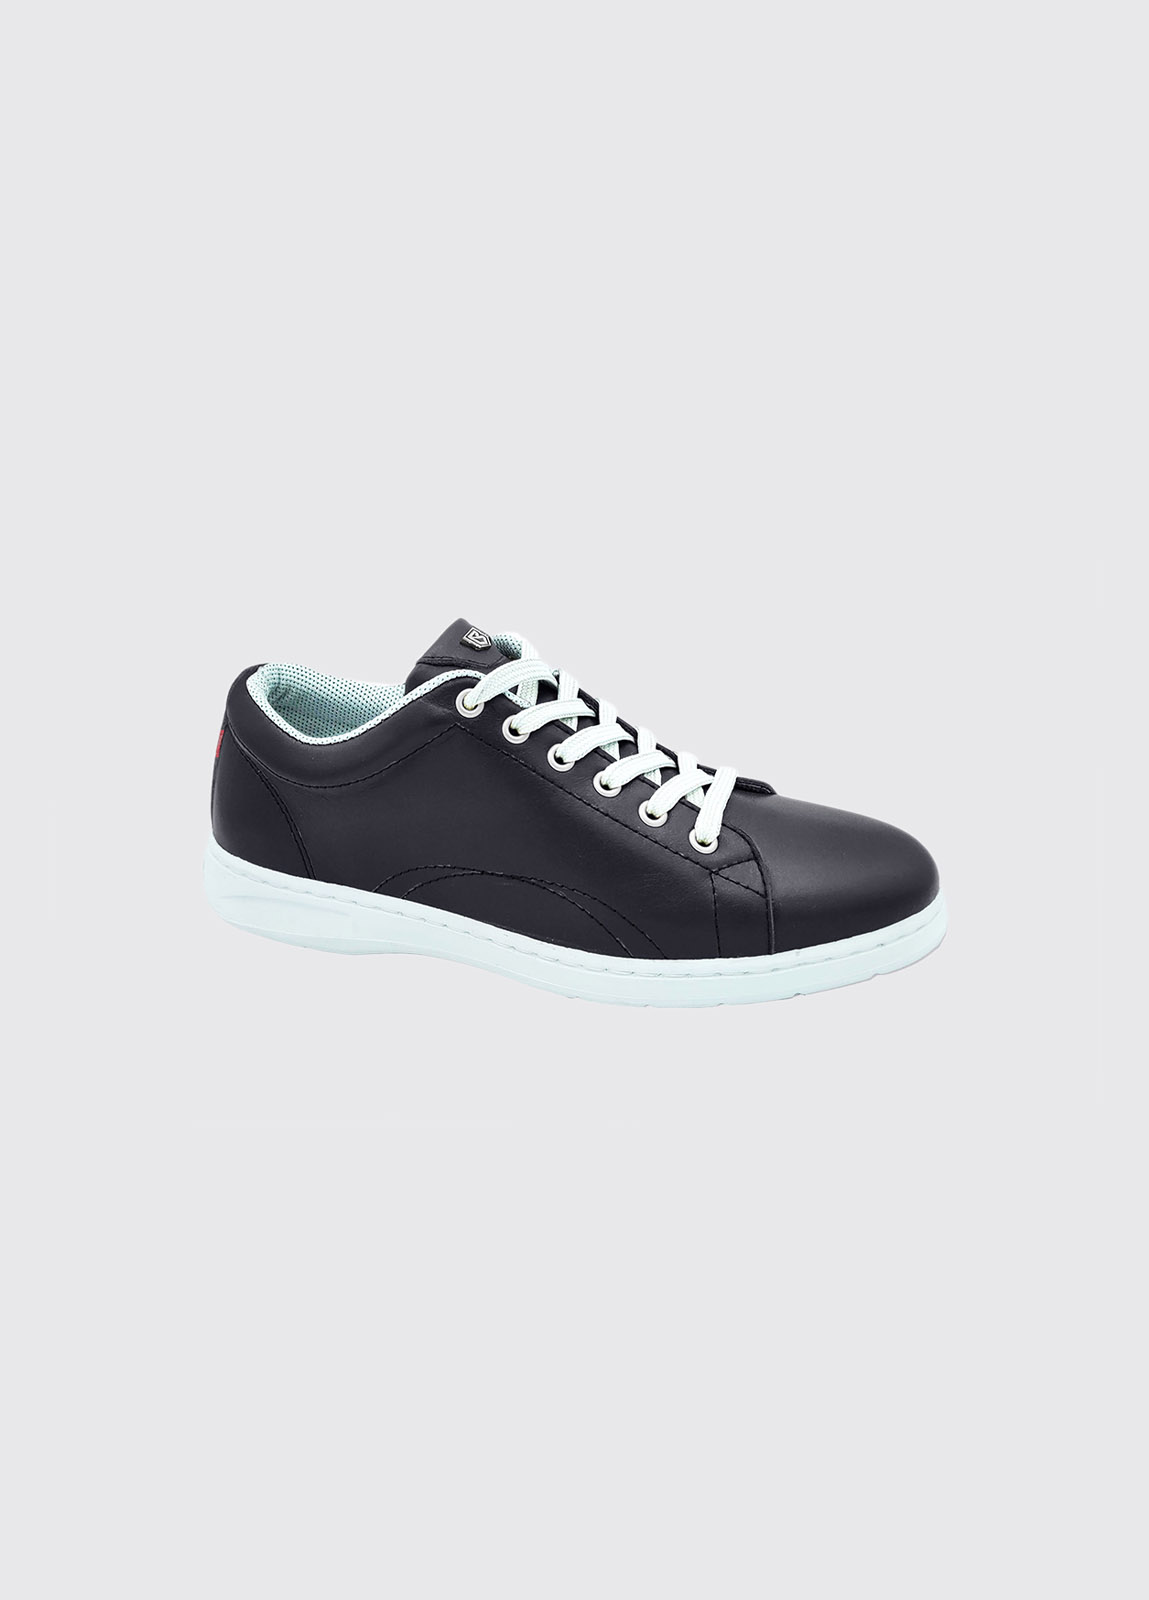 Rochelle Leather Trainer - Navy - Size EU 37